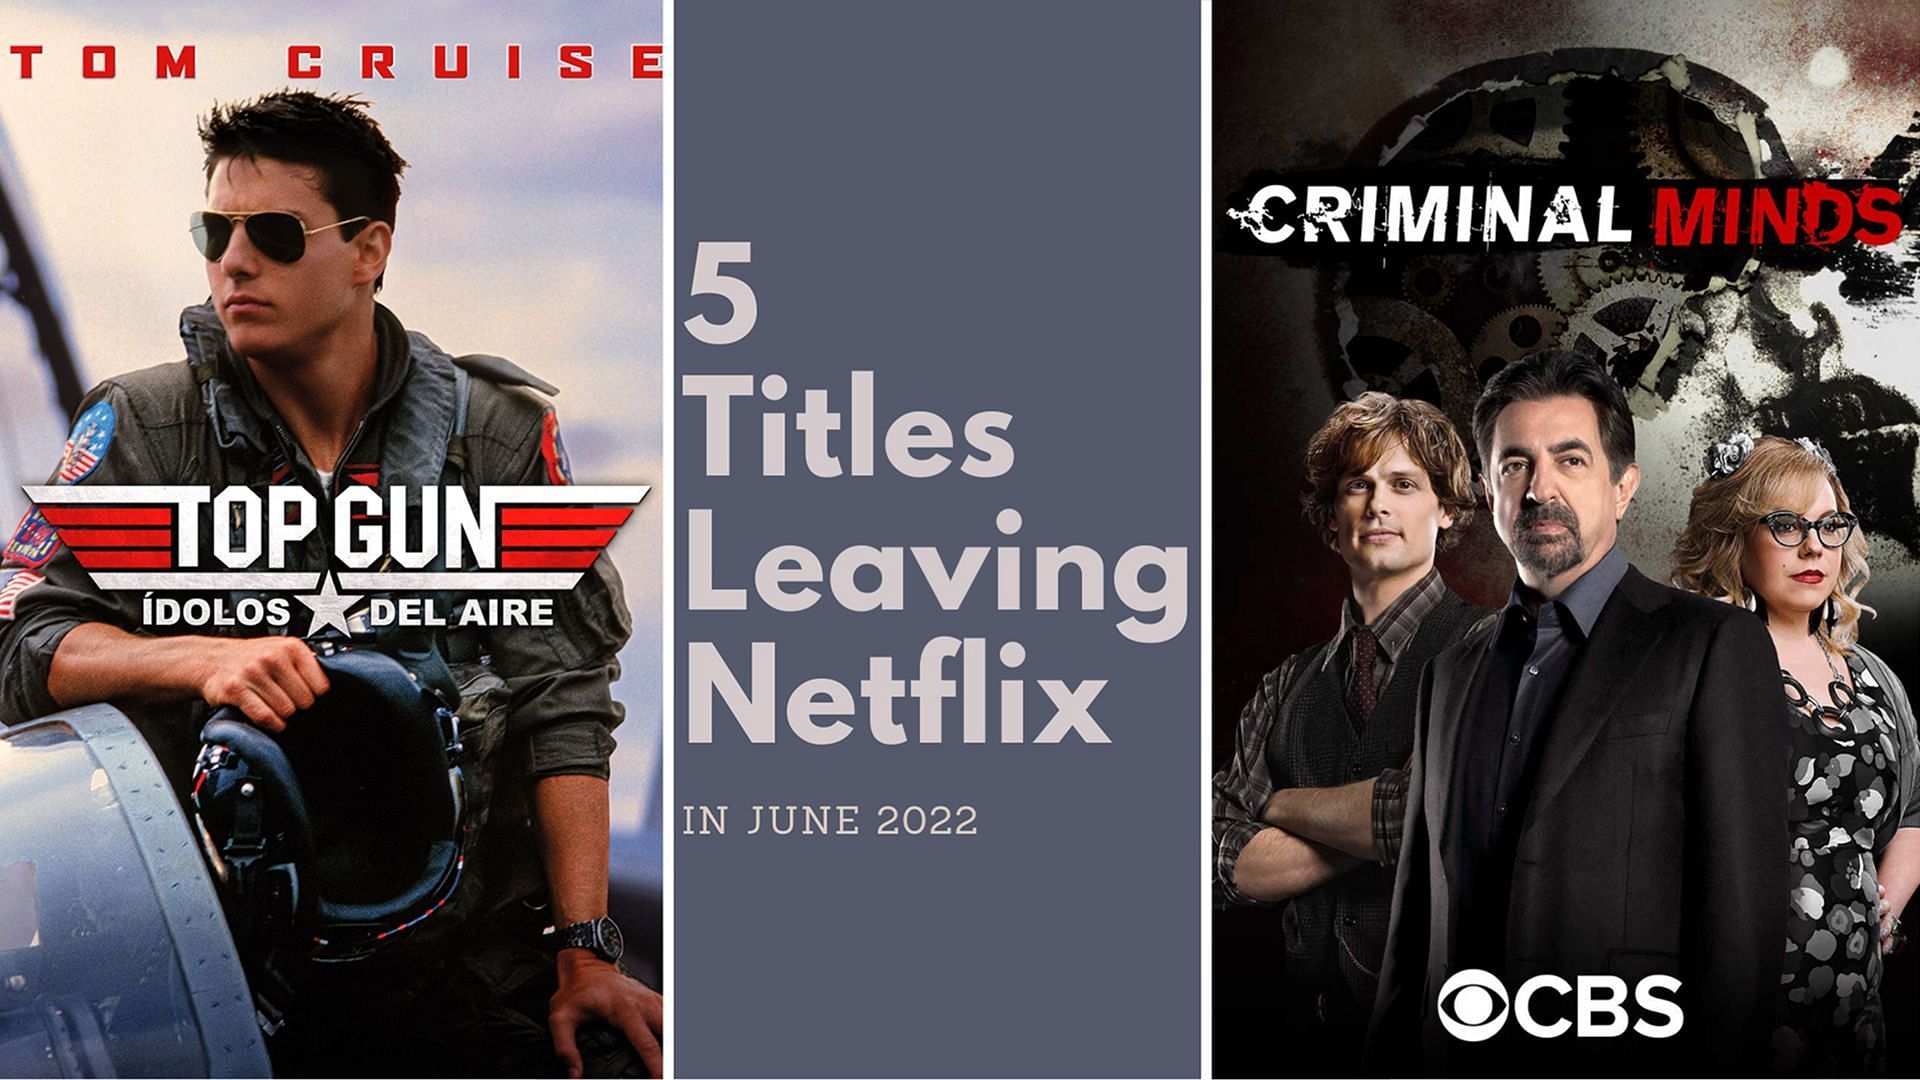 June 2022 From Top Gun to Criminal Minds, 5 shows and movies leaving